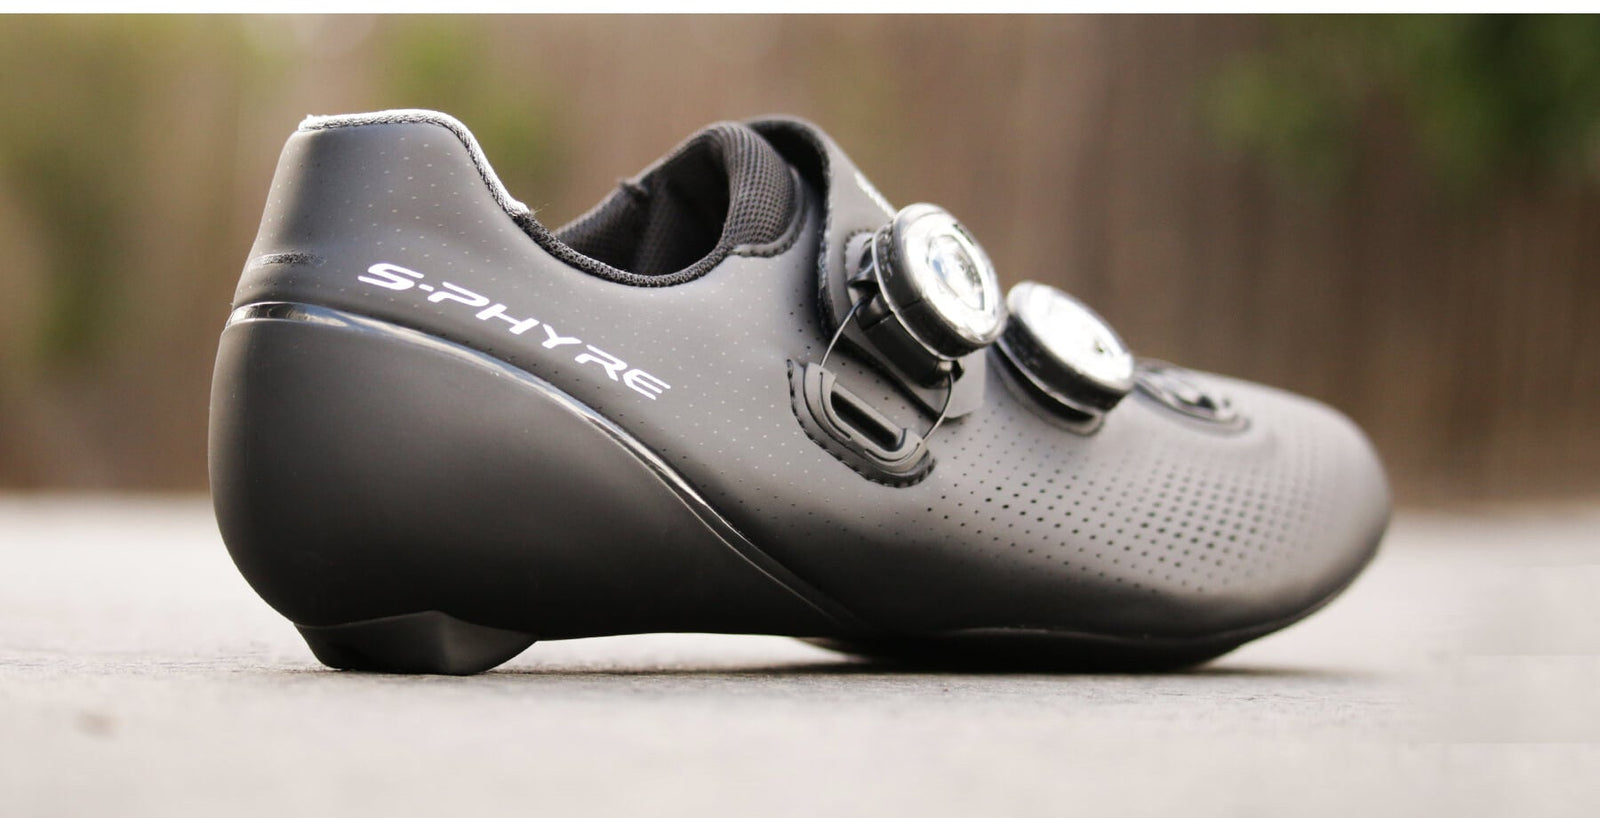 Bringing the Heat: Shimano S-Phyre RC901 Shoe in Review